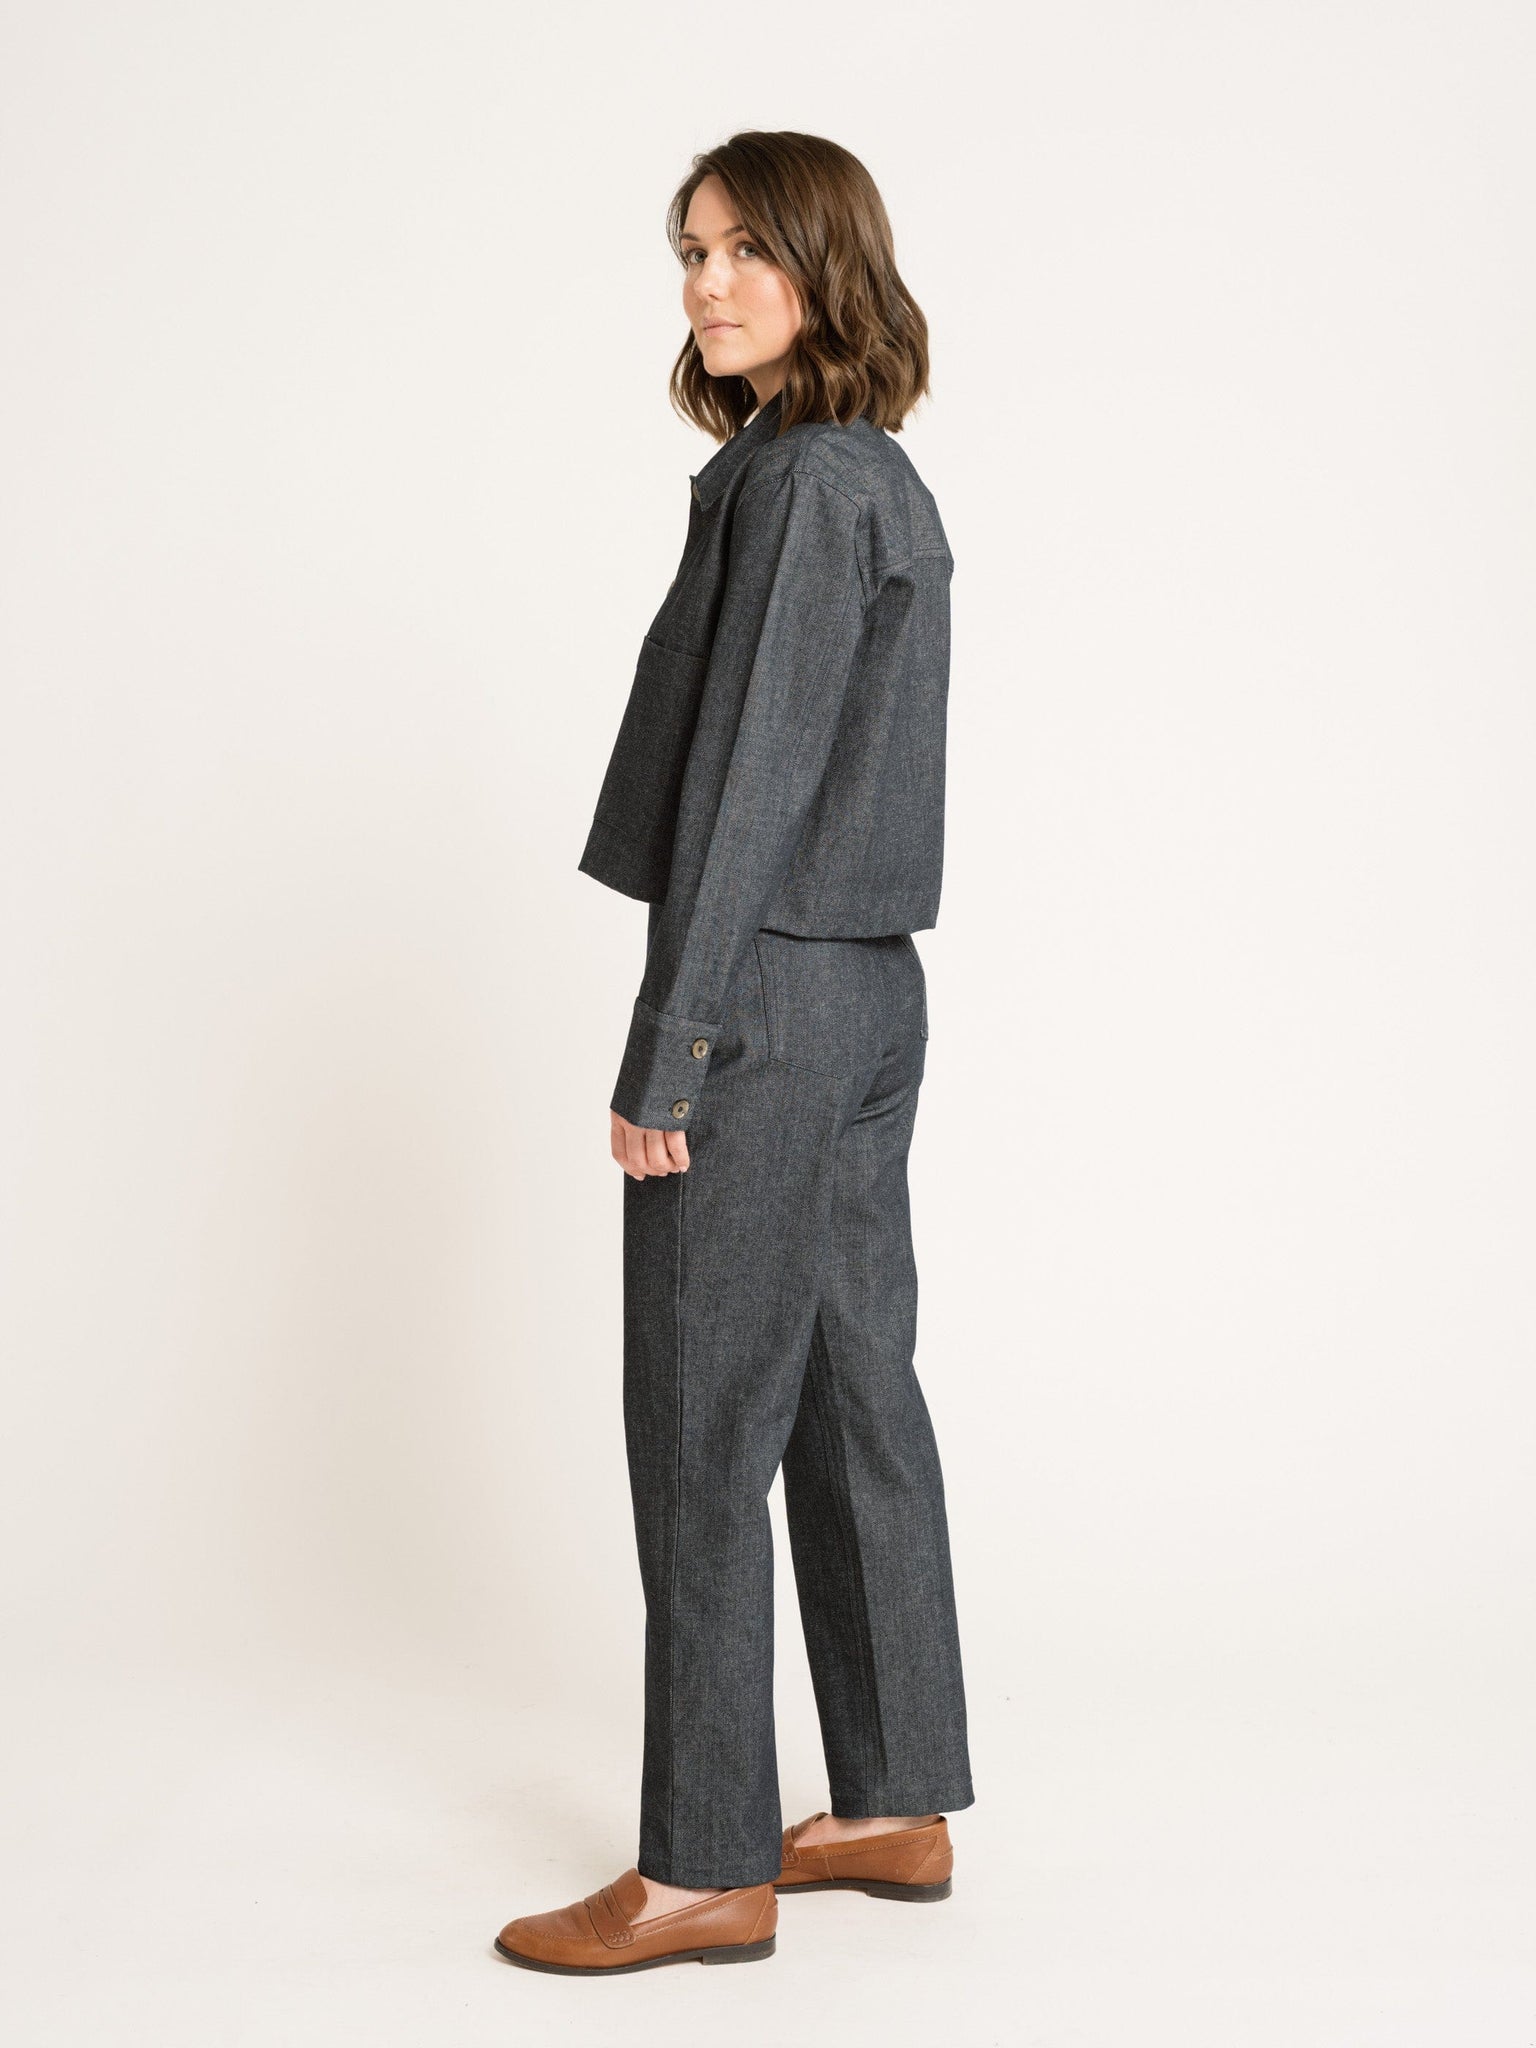 The back view of a woman wearing a Camp Jacket - Vintage Denim jumpsuit.